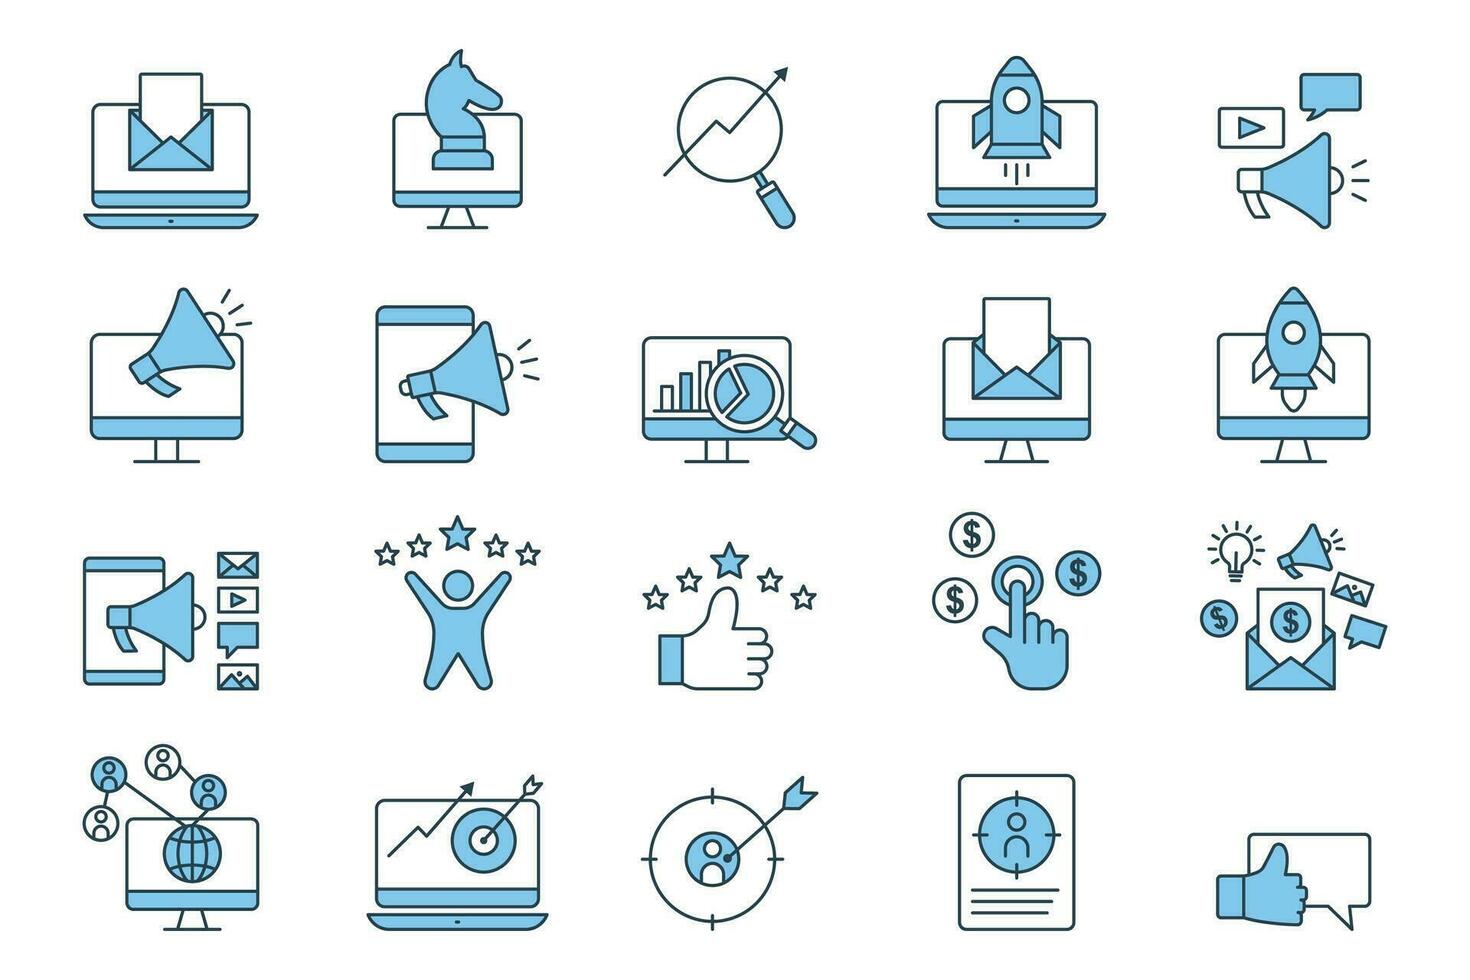 Digital marketing set icon. Contains analyst icons, email marketing, seo, marketing strategy, social marketing, feed back and others. Flat line icon style design. Simple vector design editable